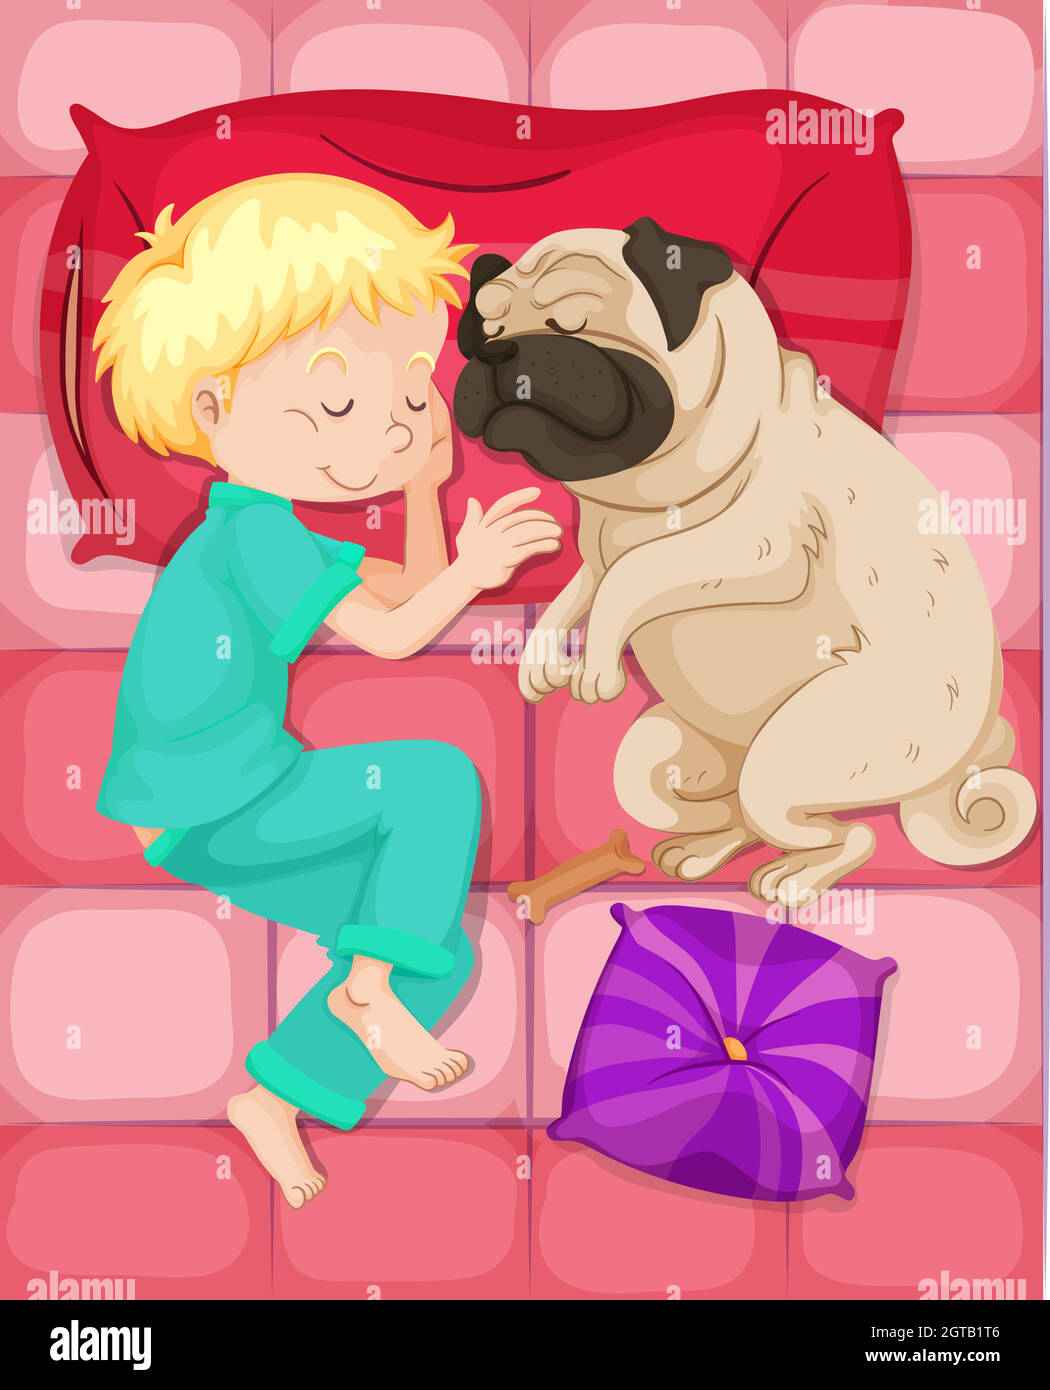 Boy sleeping with pet dog in bed Stock Vector